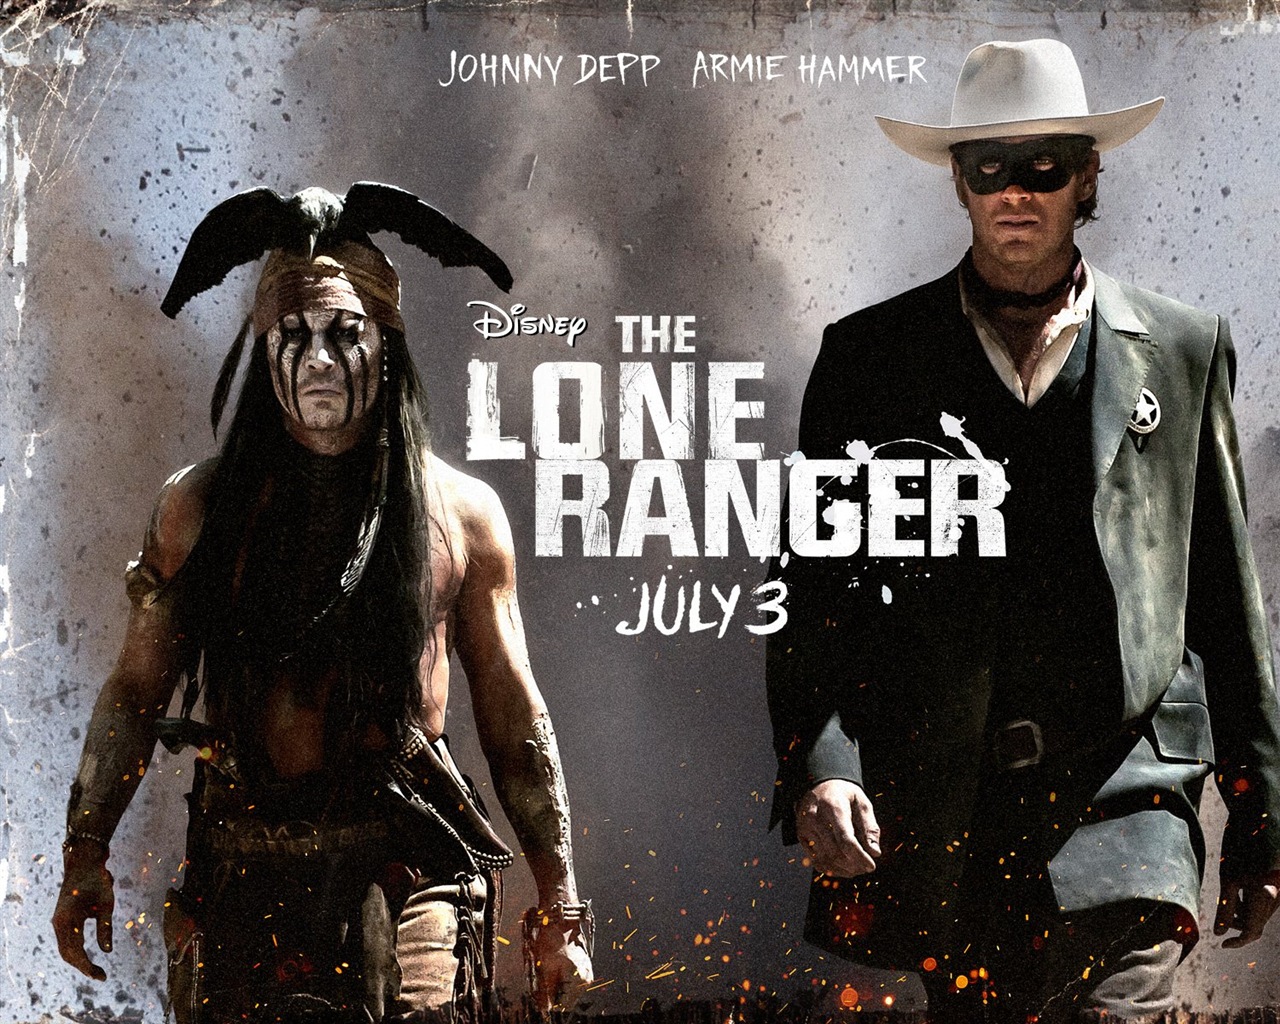 The Lone Ranger HD movie wallpapers #6 - 1280x1024